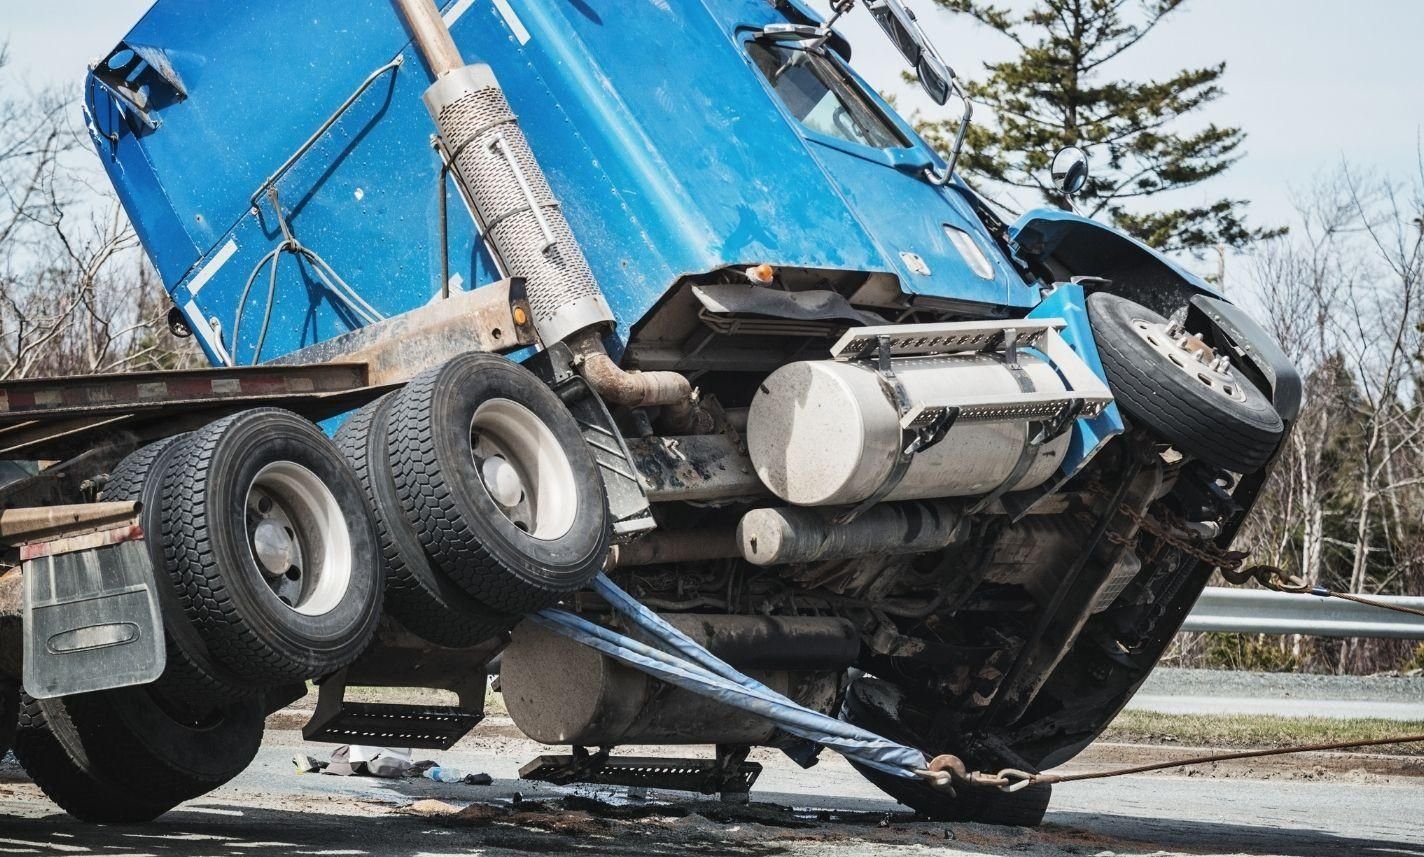 claxton-commercial-truck-accident-injury-lawyer